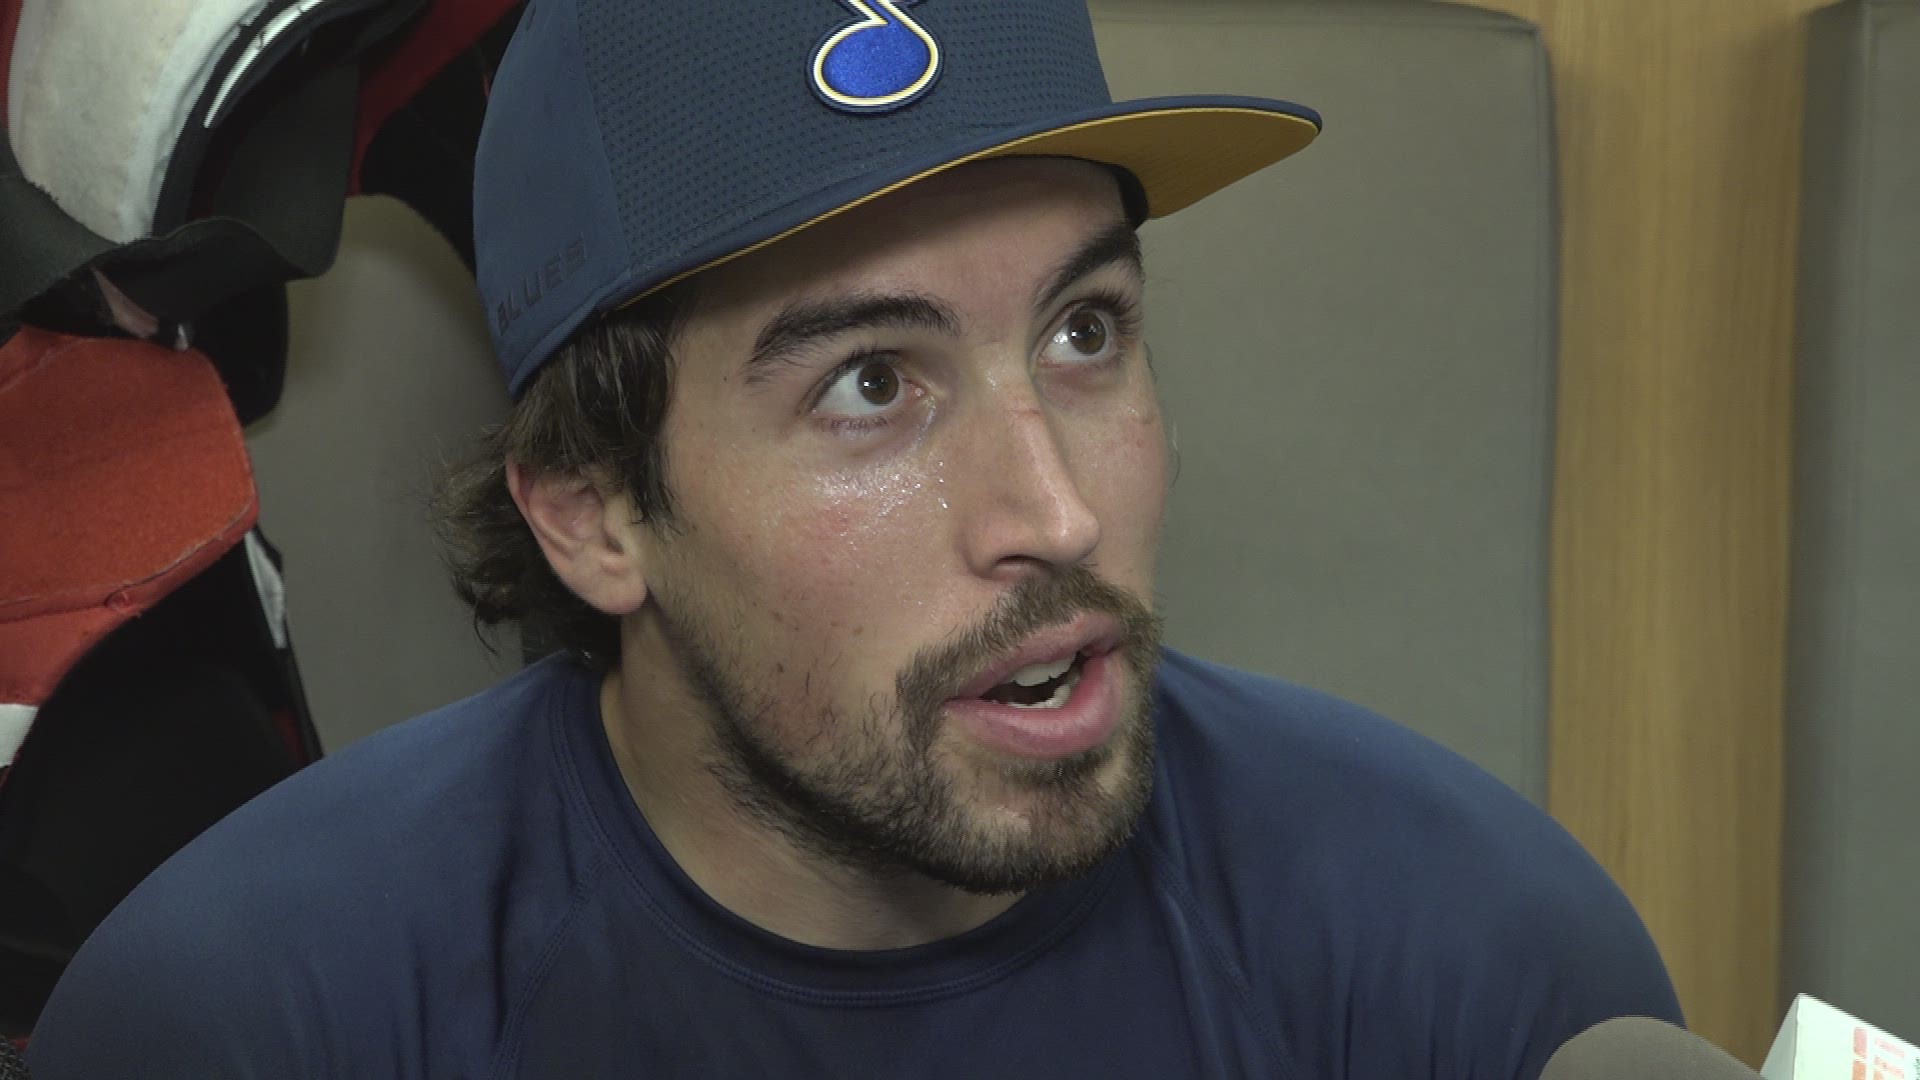 New addition to the team, Justin Faulk talked to reporters ahead of the first game of the 2019-20 season. He talked about his transition to the Blues.